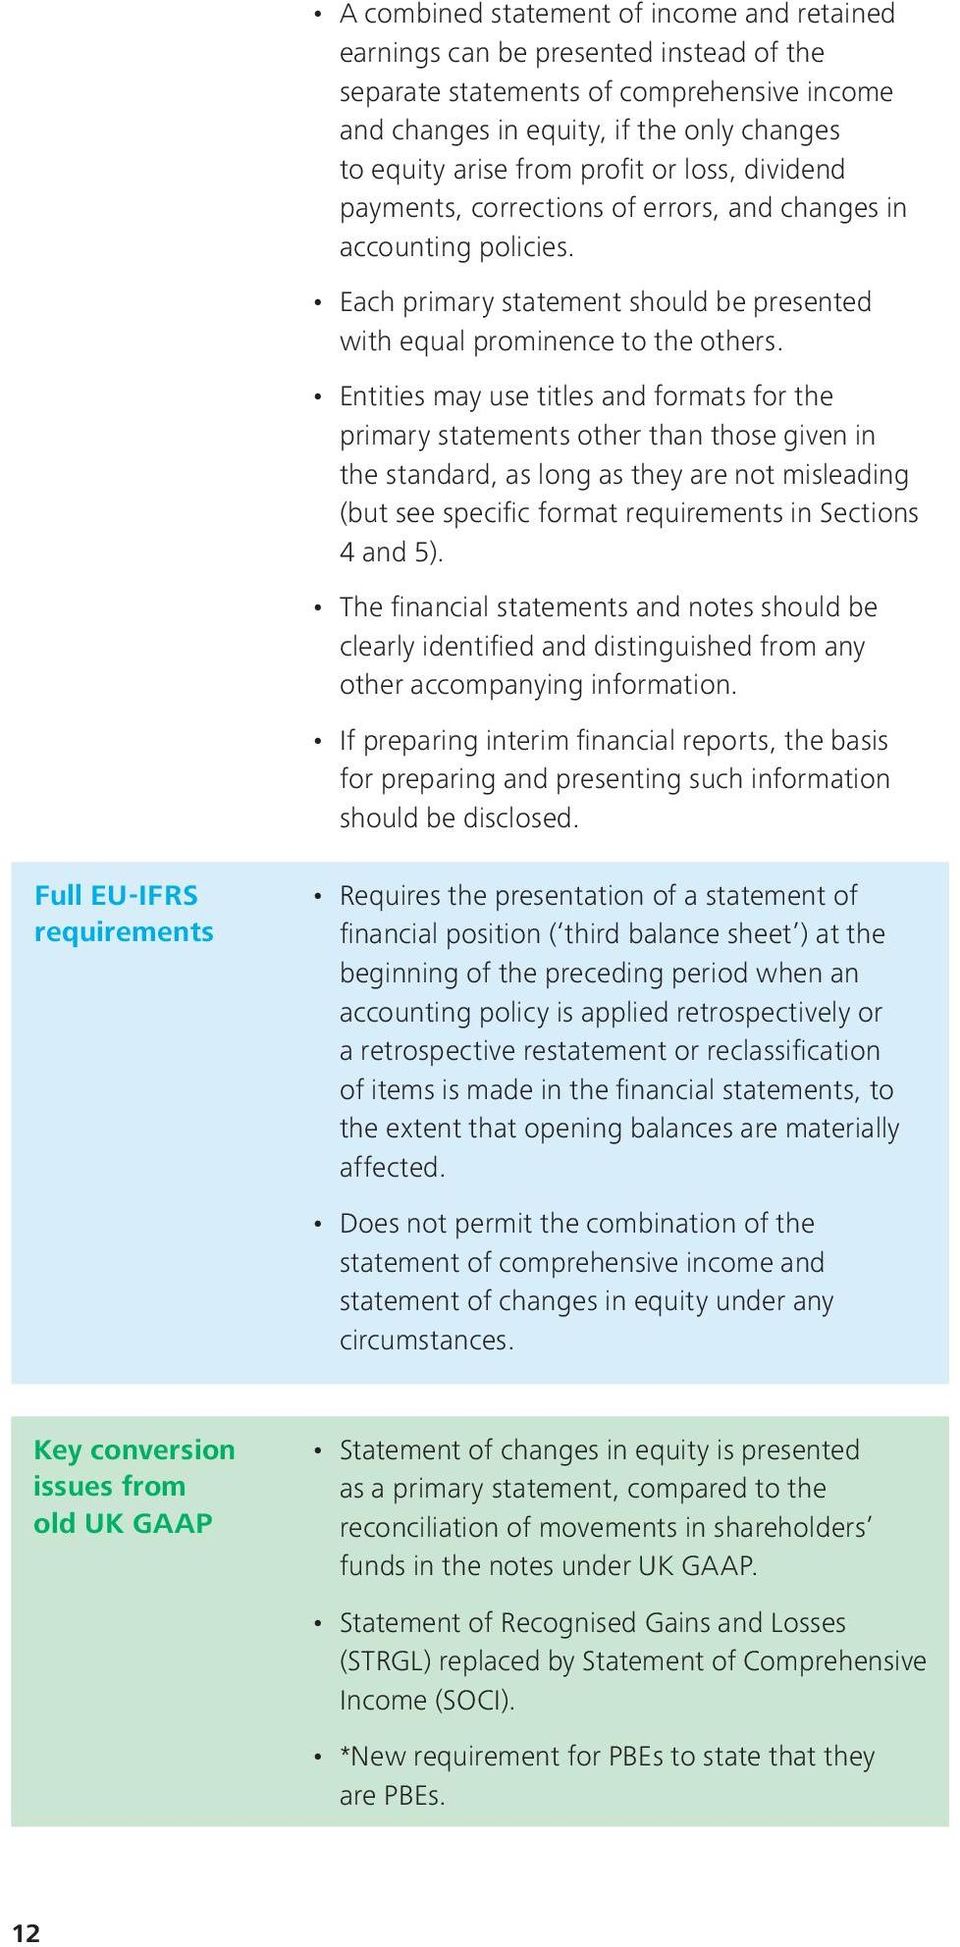 Entities may use titles and formats for the primary statements other than those given in the standard, as long as they are not misleading (but see specific format requirements in Sections 4 and 5).